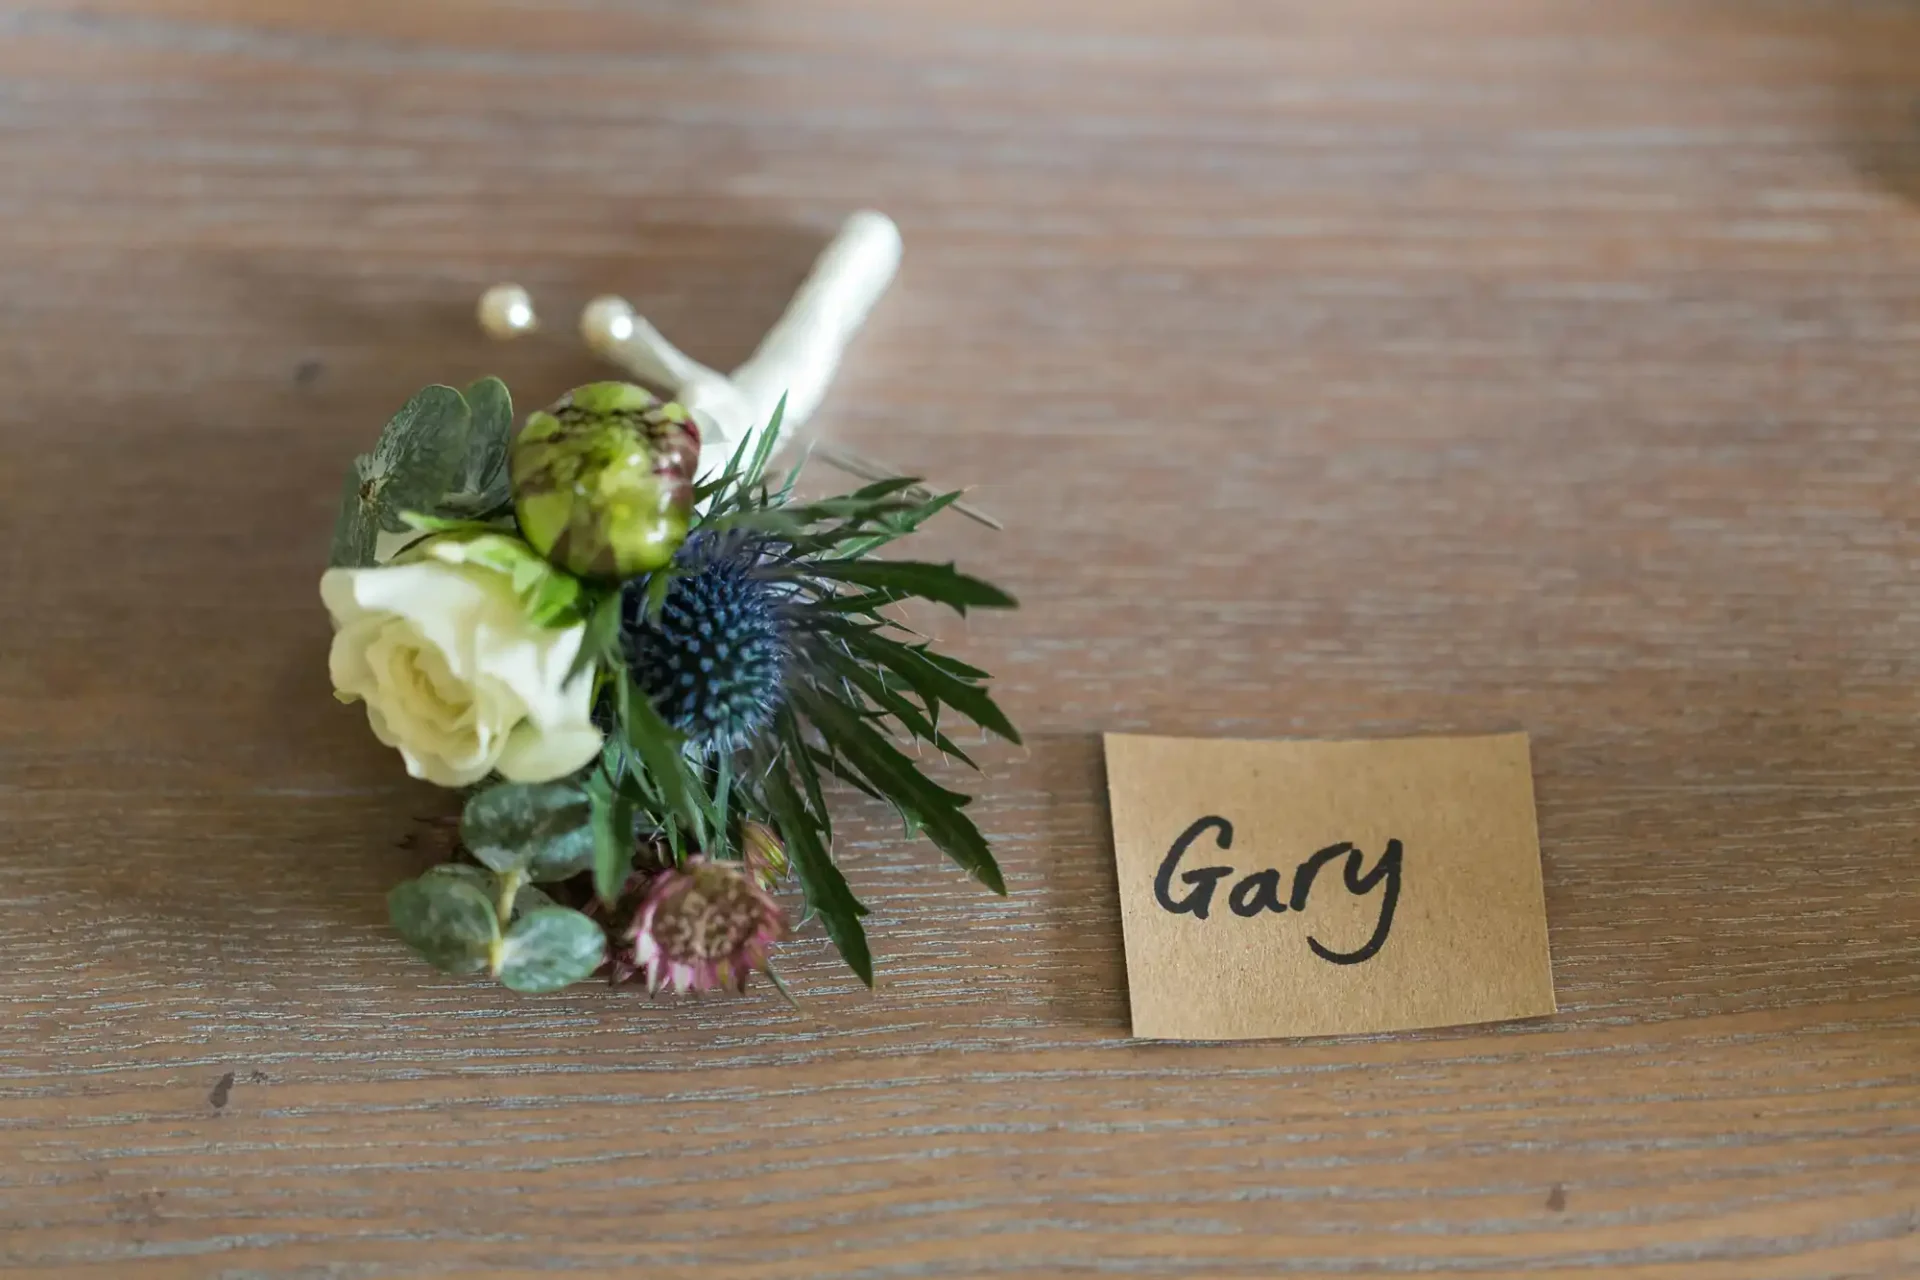 A small floral arrangement with a white rose beside a place card labeled "gary" on a wooden table.